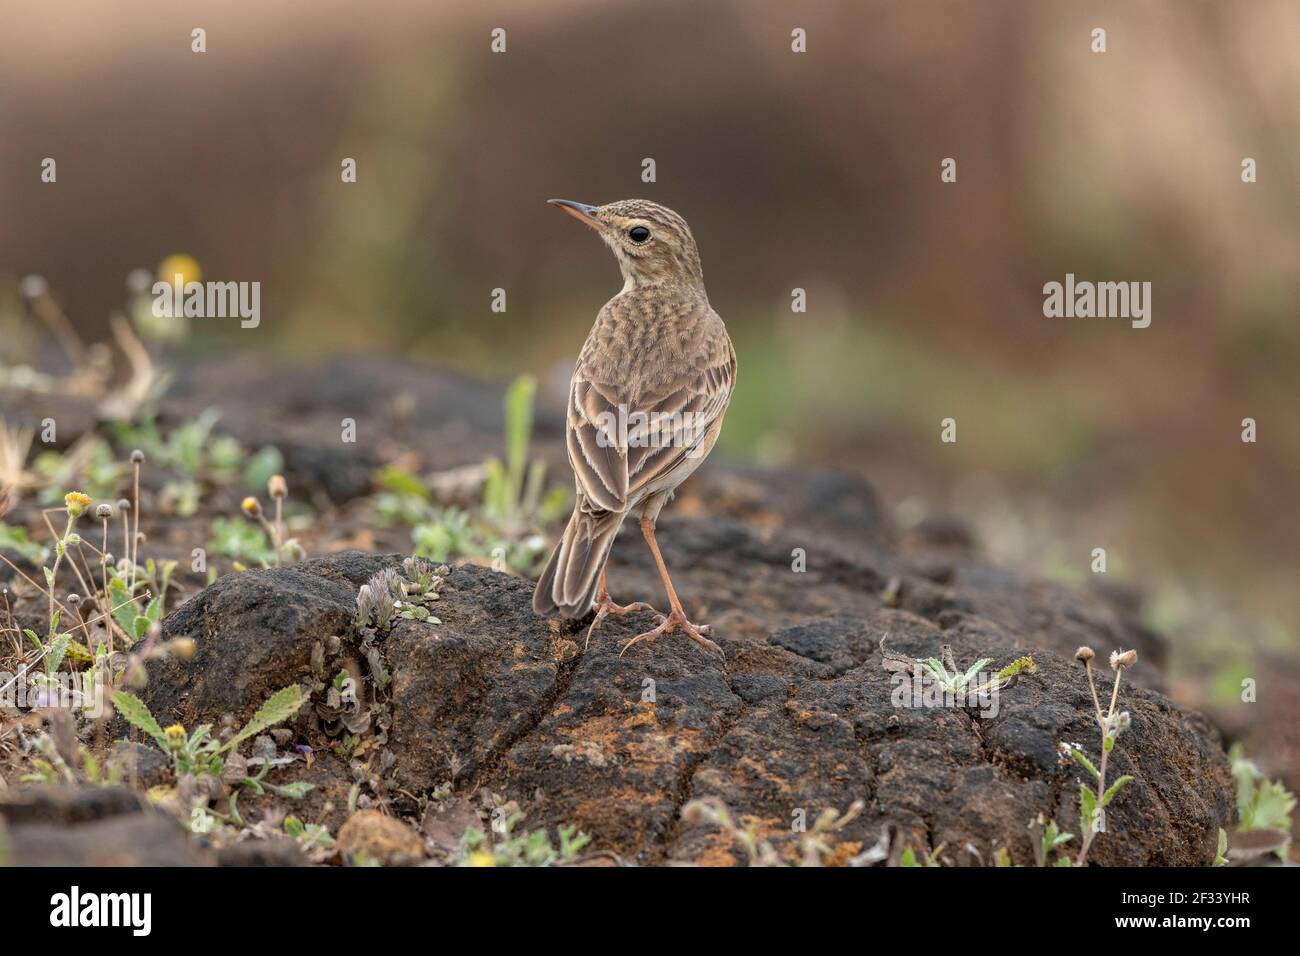 Pipit, Anthus, Pune. Small passerine birds with medium to long tails. Stock Photo